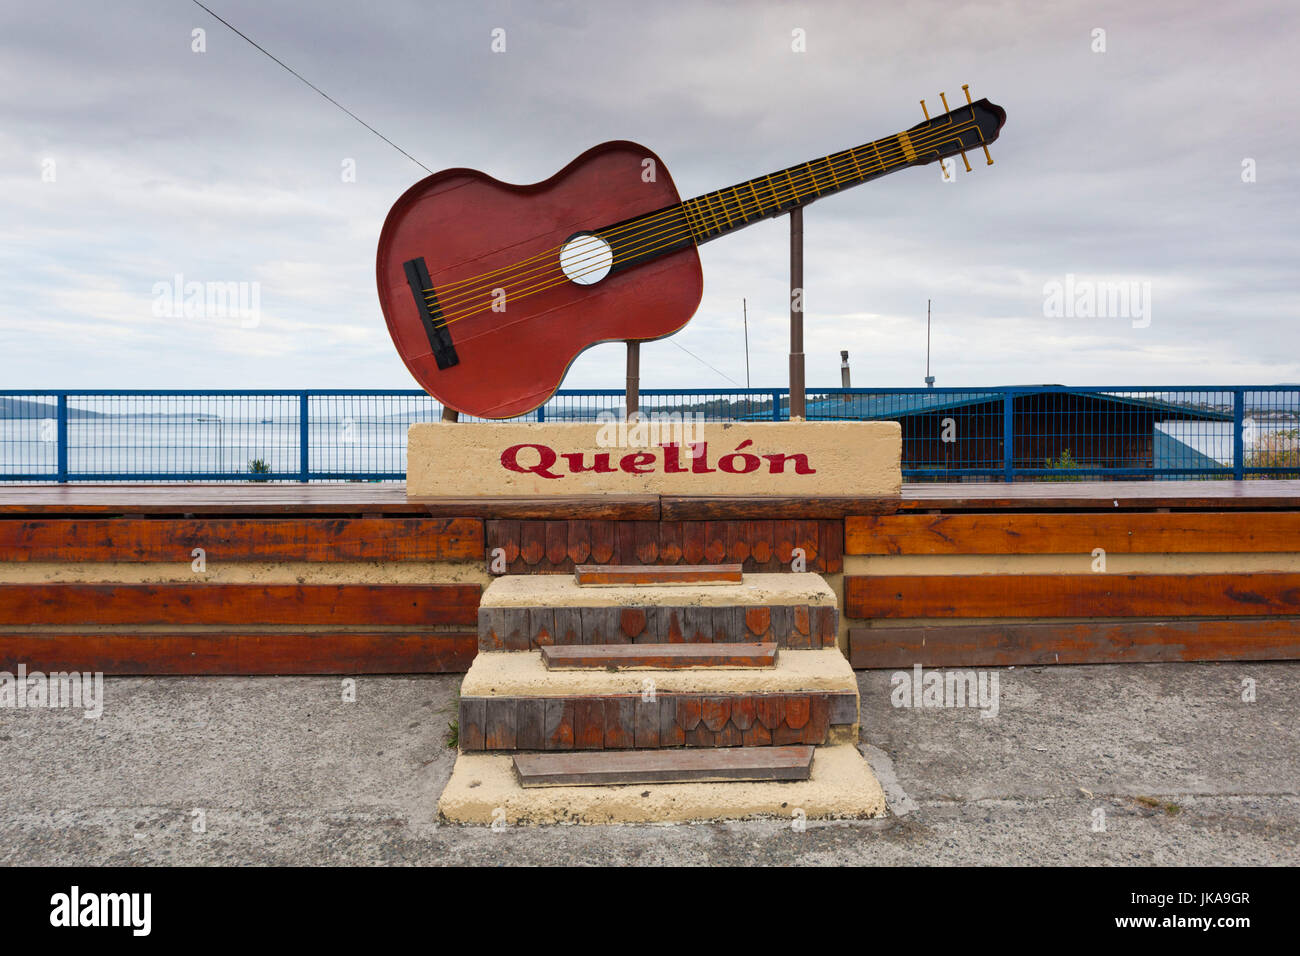 Chile, Chiloe Island, Quellon, town sign with guitar Stock Photo - Alamy